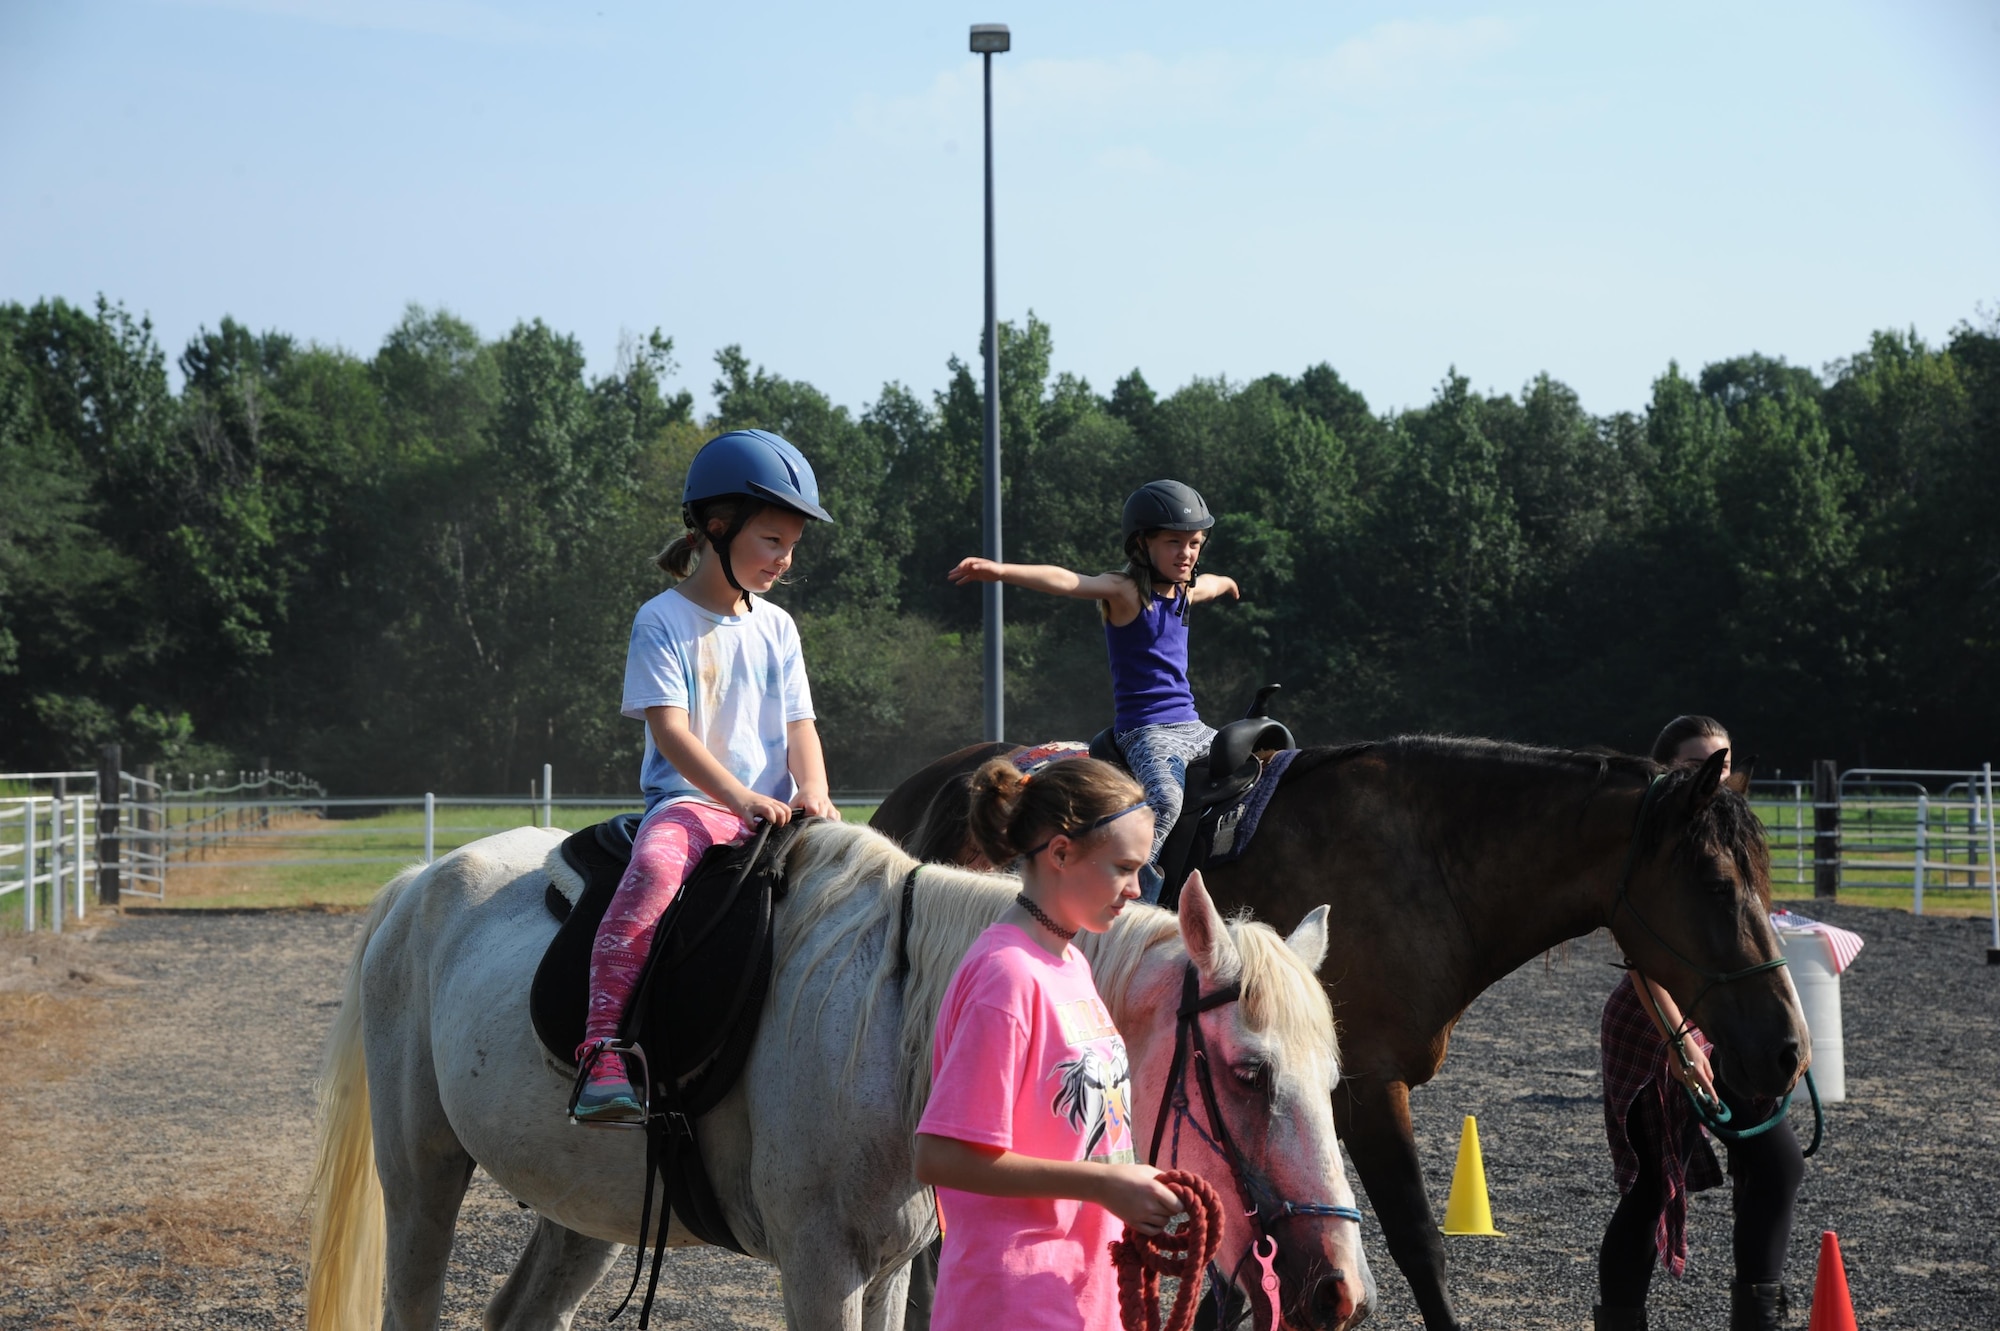 Members of the Exceptional Family Member Program from Columbus Air Force Base, Mississippi, ride horses July 21, 2017, in Caledonia, Mississippi, as part of a Riding to Improve Development, Esteem, Strength and Spirit Program function. Volunteers ensured riders were safe and enjoyed themselves. (U.S. Air Force photo by Airman 1st Class Beaux Hebert)